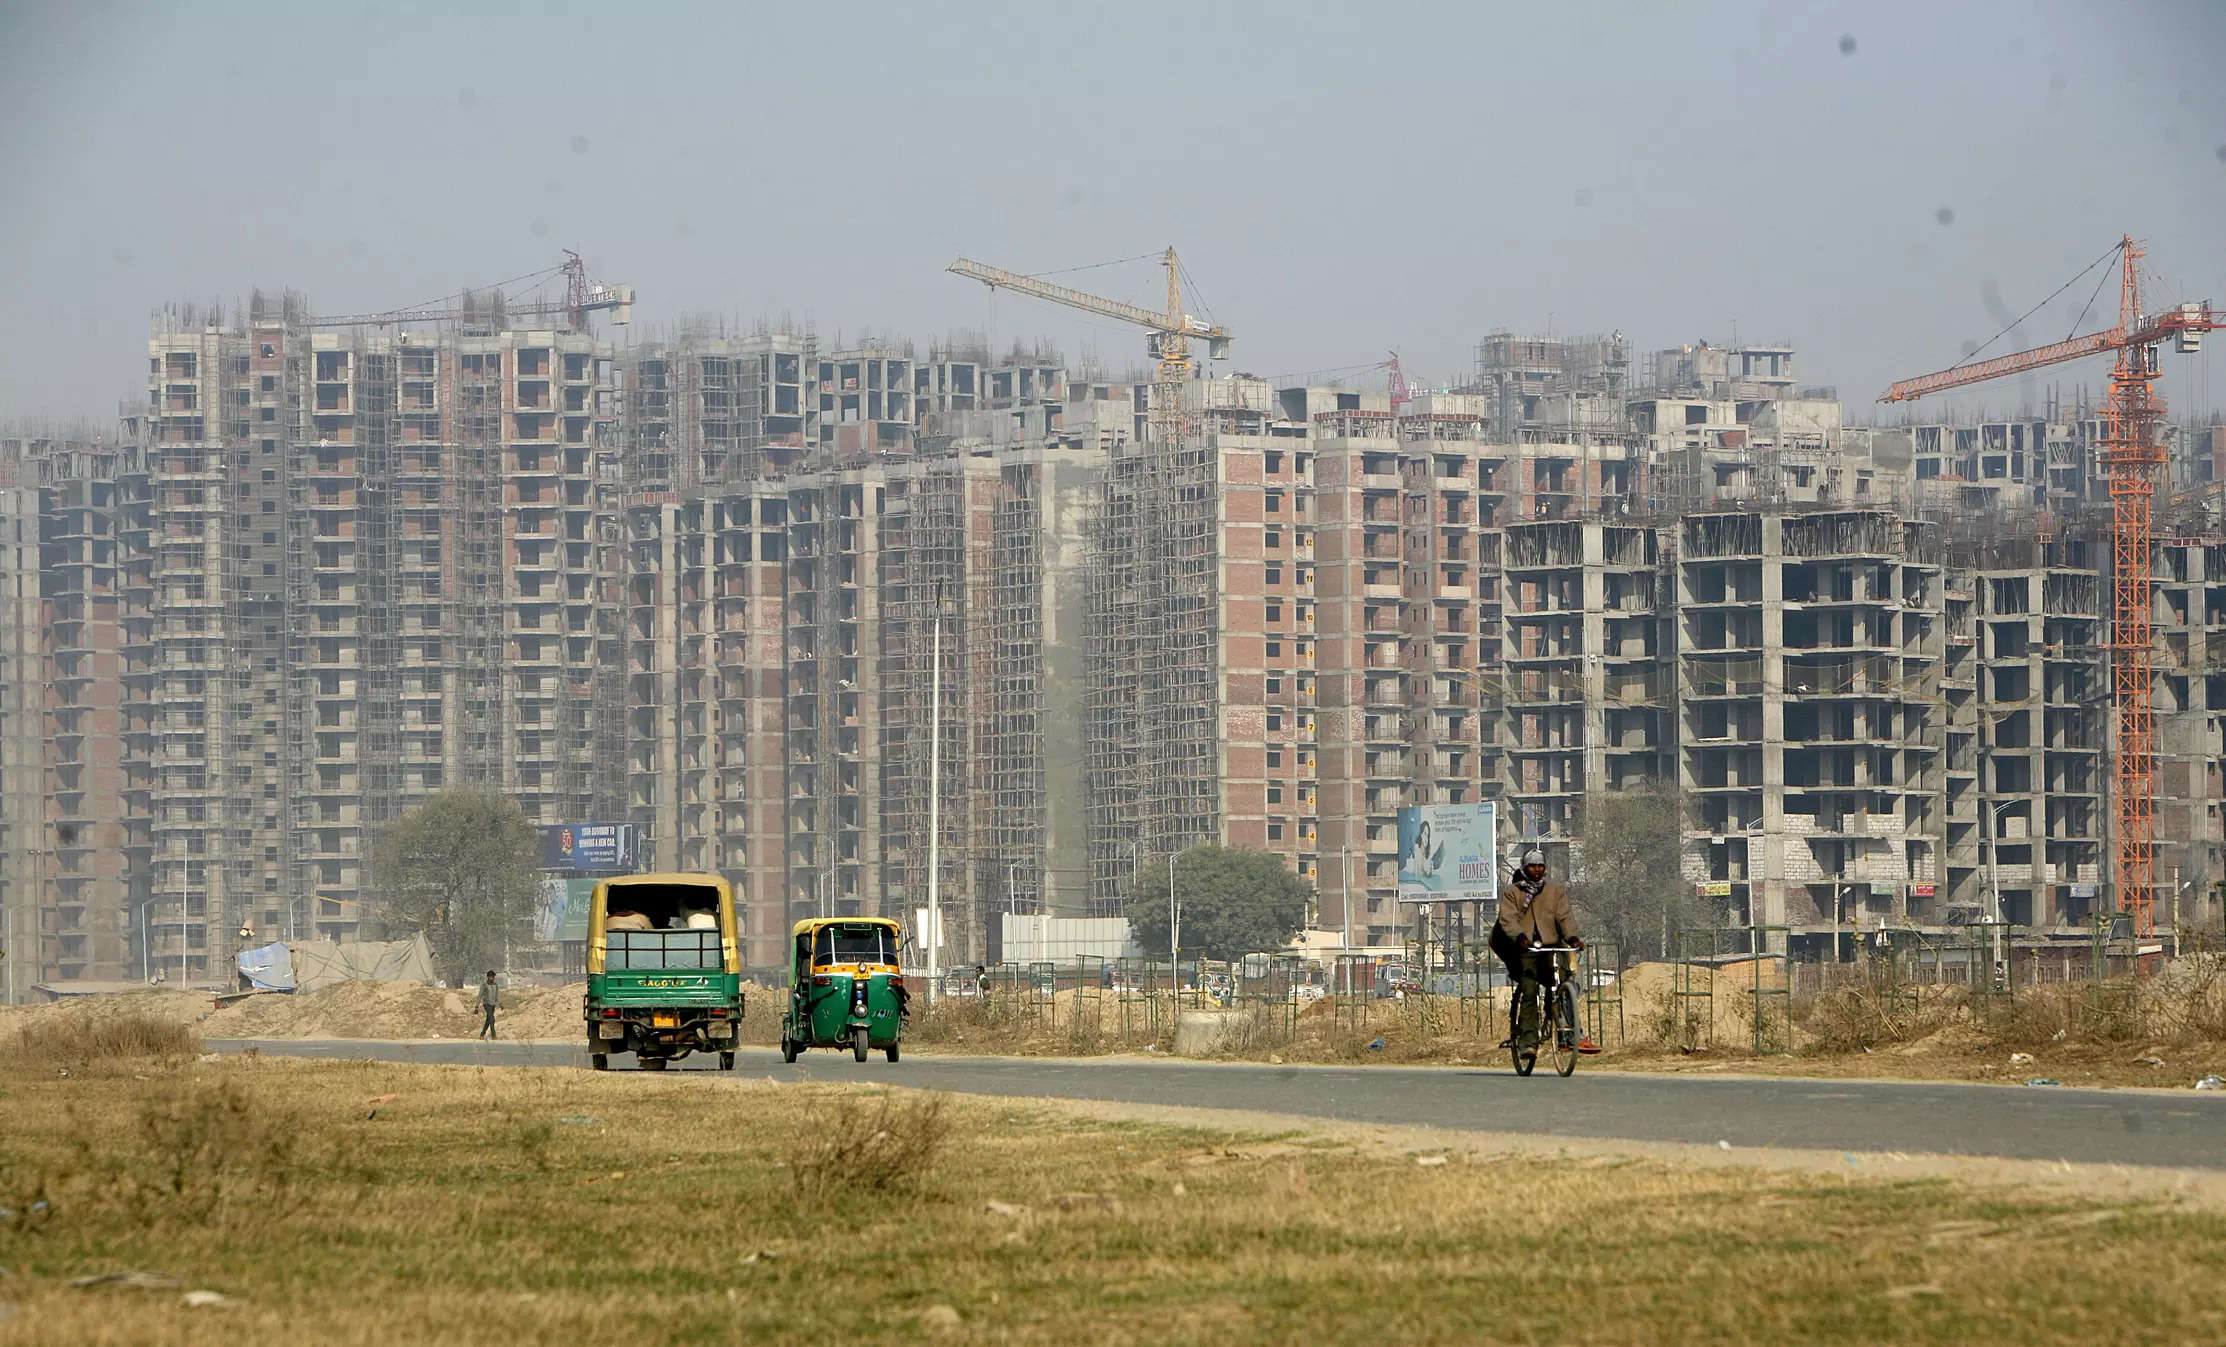 Residential housing sales in top 7 cities touch decade-high of 215,000  units despite high rates: JLL | Real Estate News, Times Now